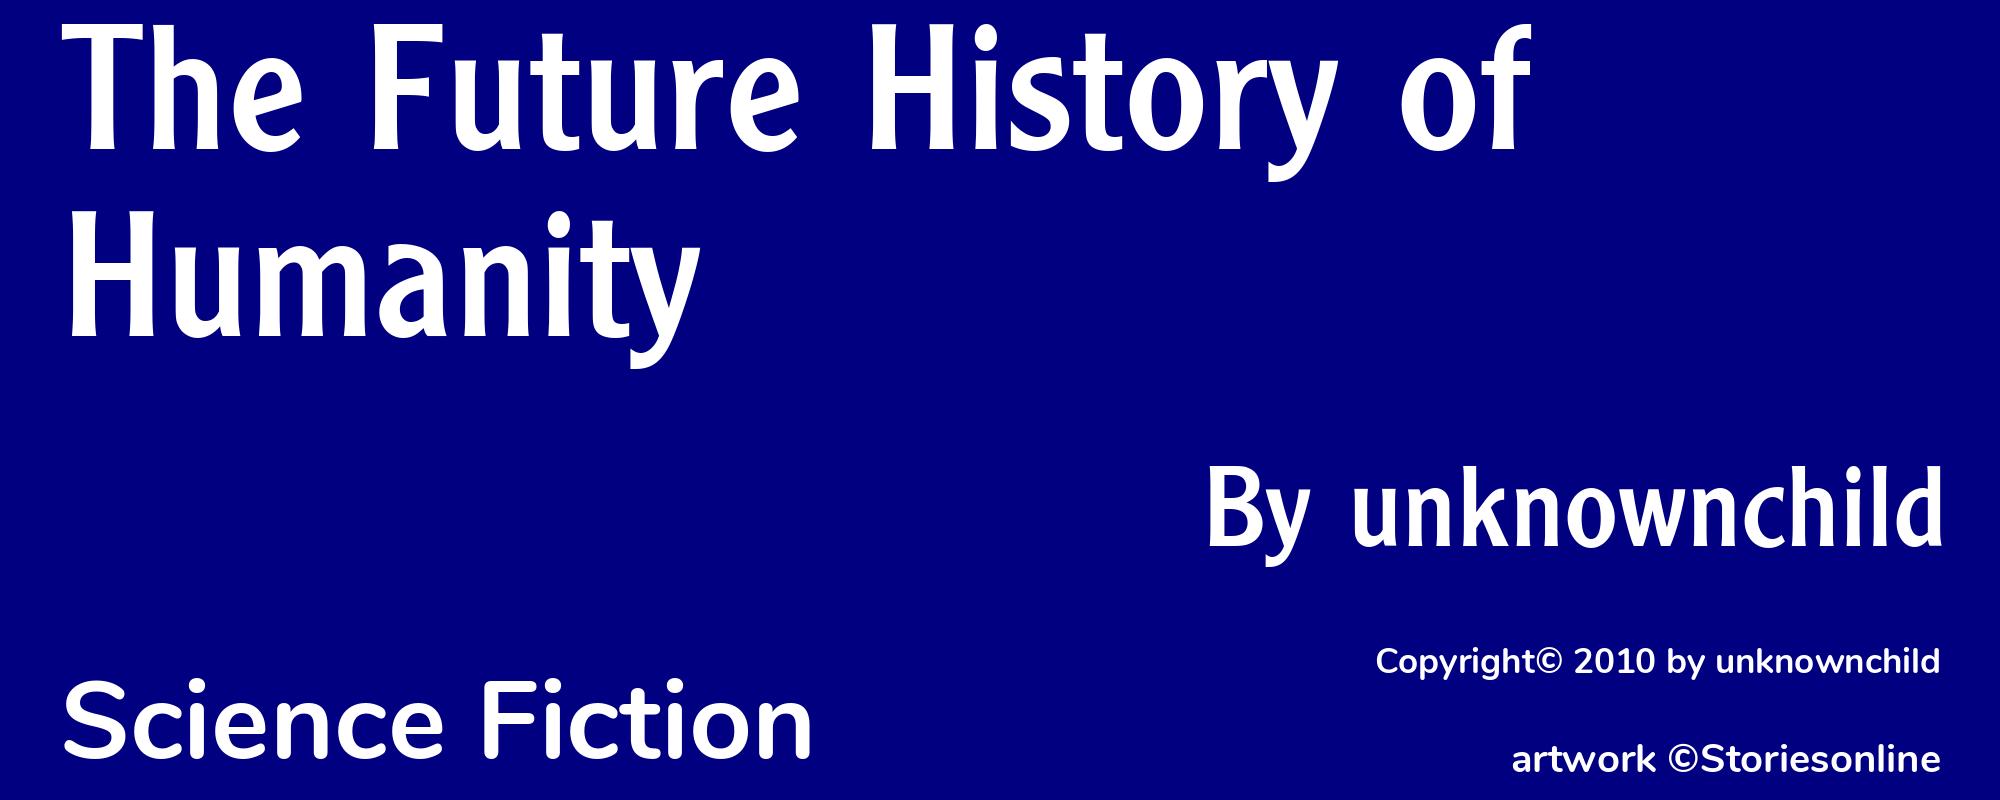 The Future History of Humanity - Cover